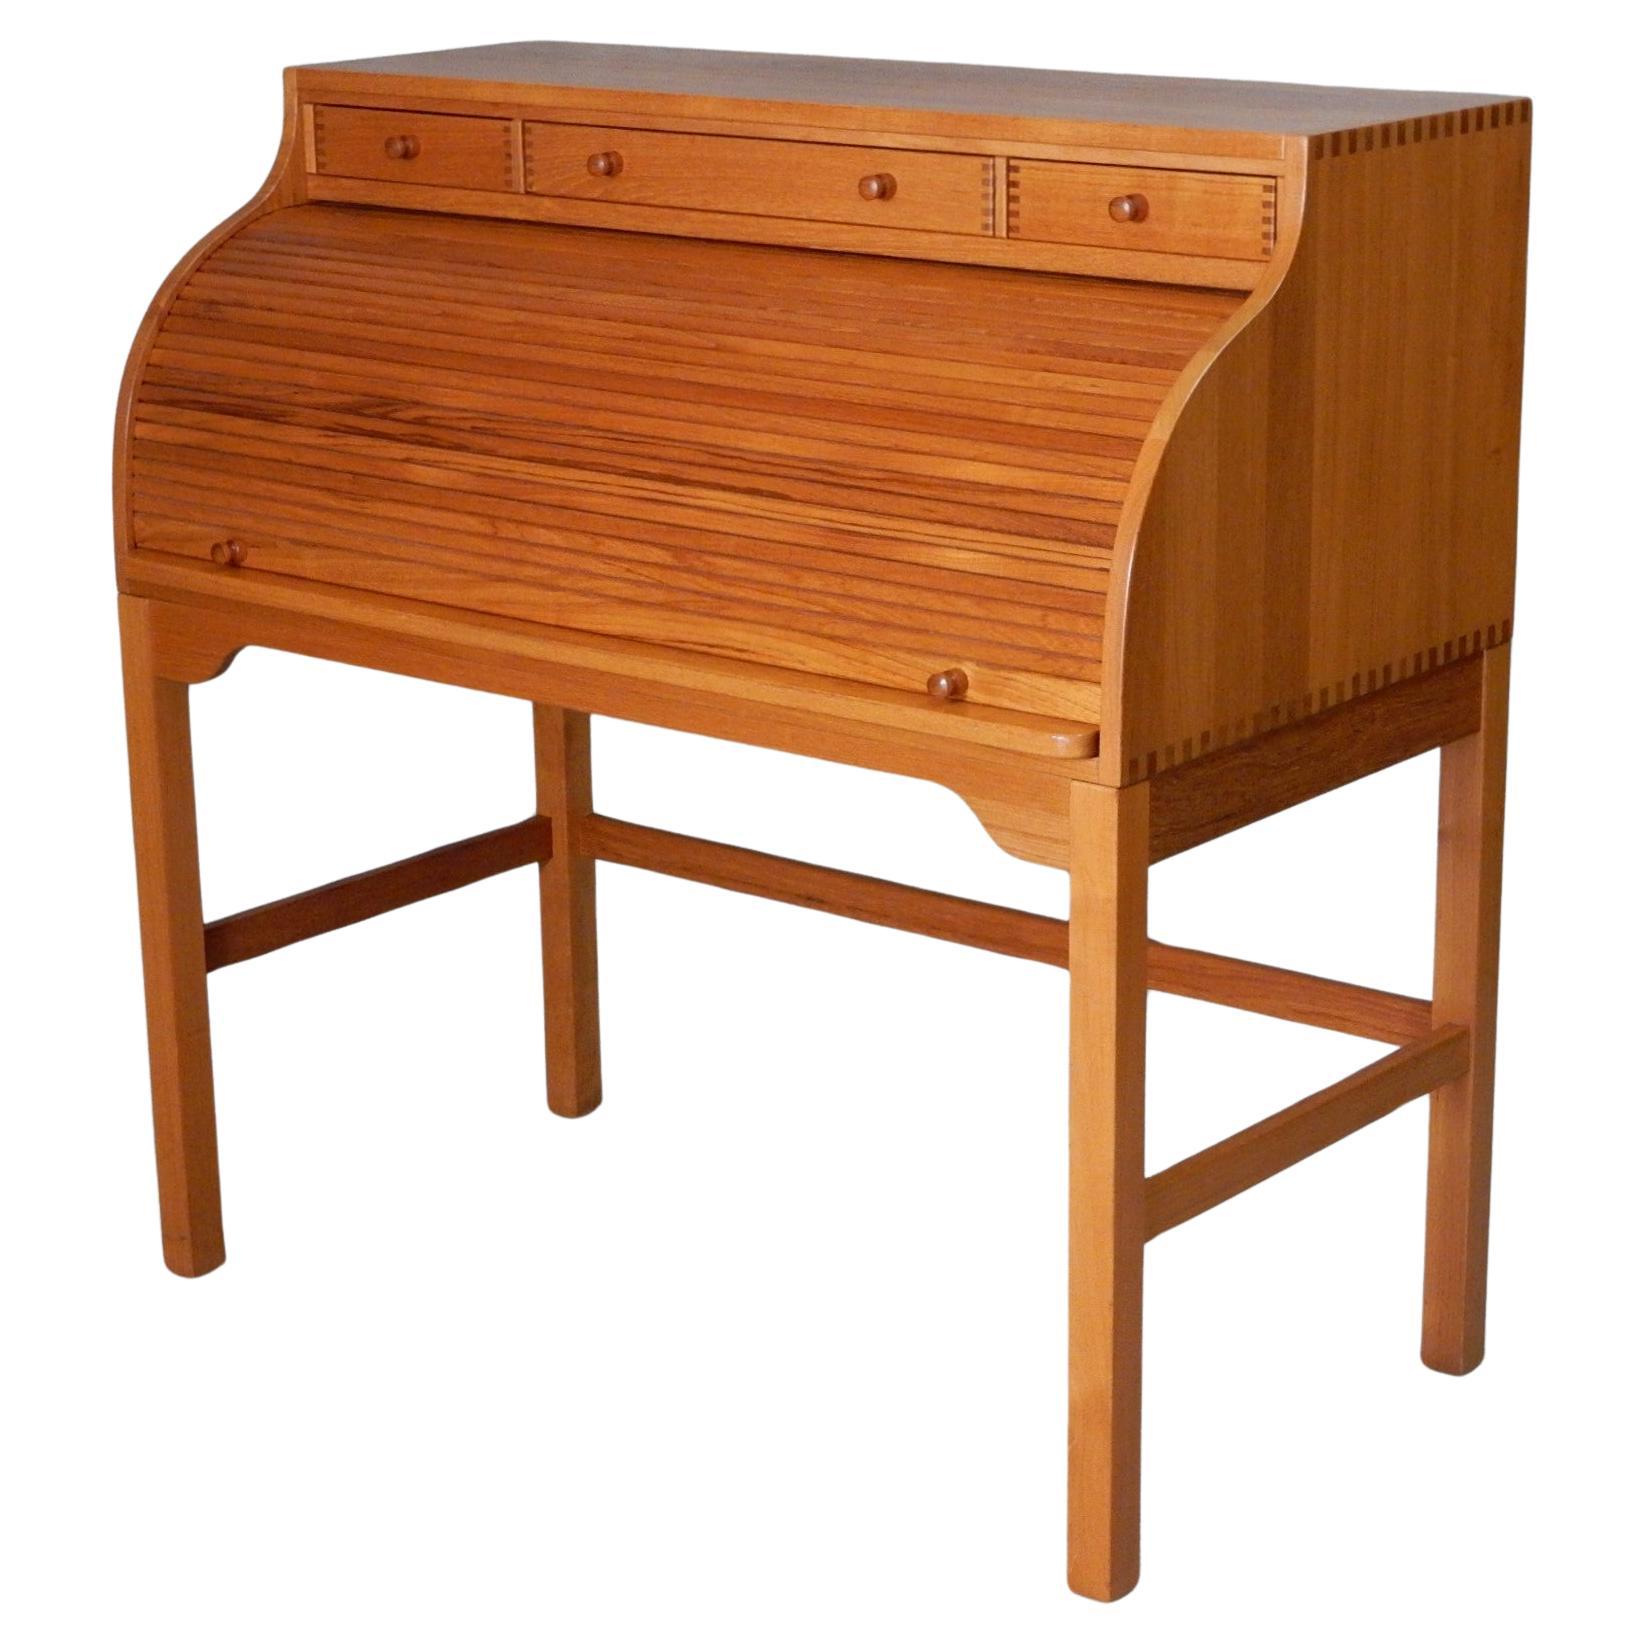 Stunning solid teak writing or letter desk designed by Danish master designer Andreas Hansen.
Circa 1960's, made in Denmark. Pull out leather top writing area, 9 drawers and organization slots with a locking roll top cover (2 keys included). This